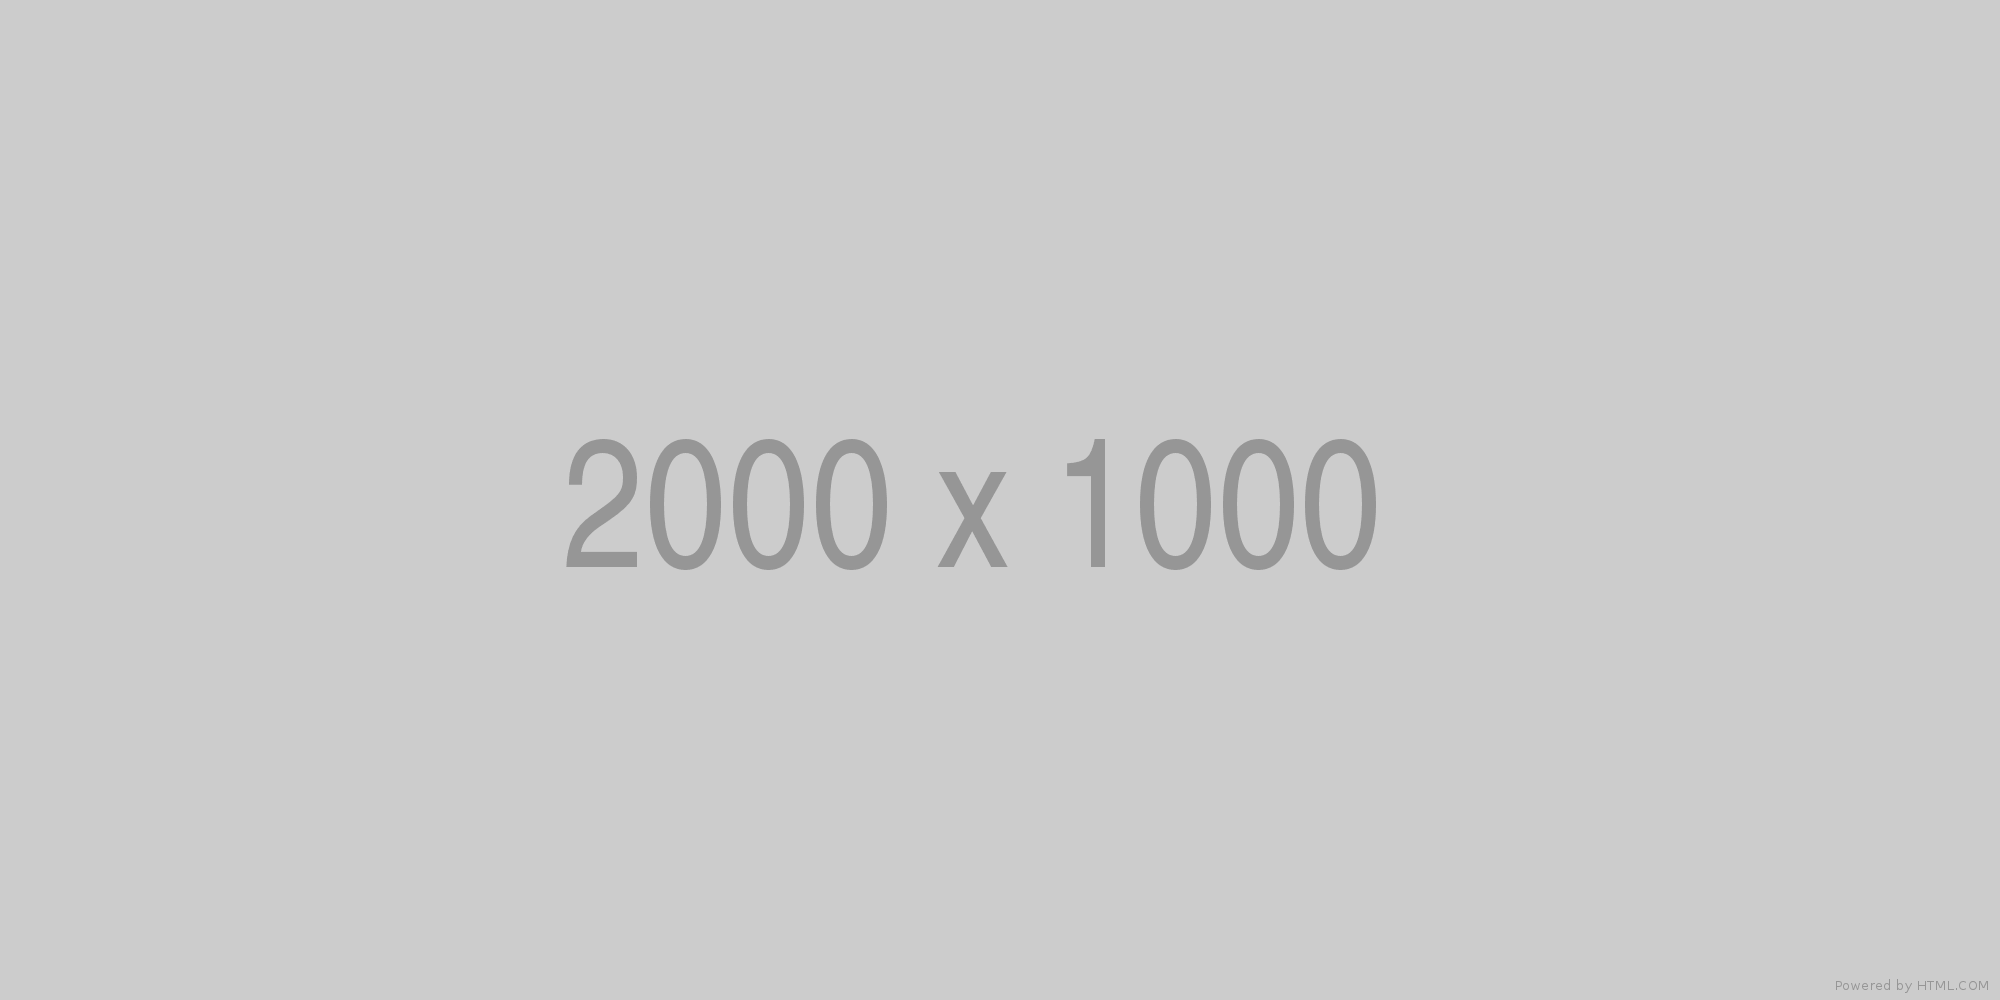 2000 x 1000 image resolution placeholder